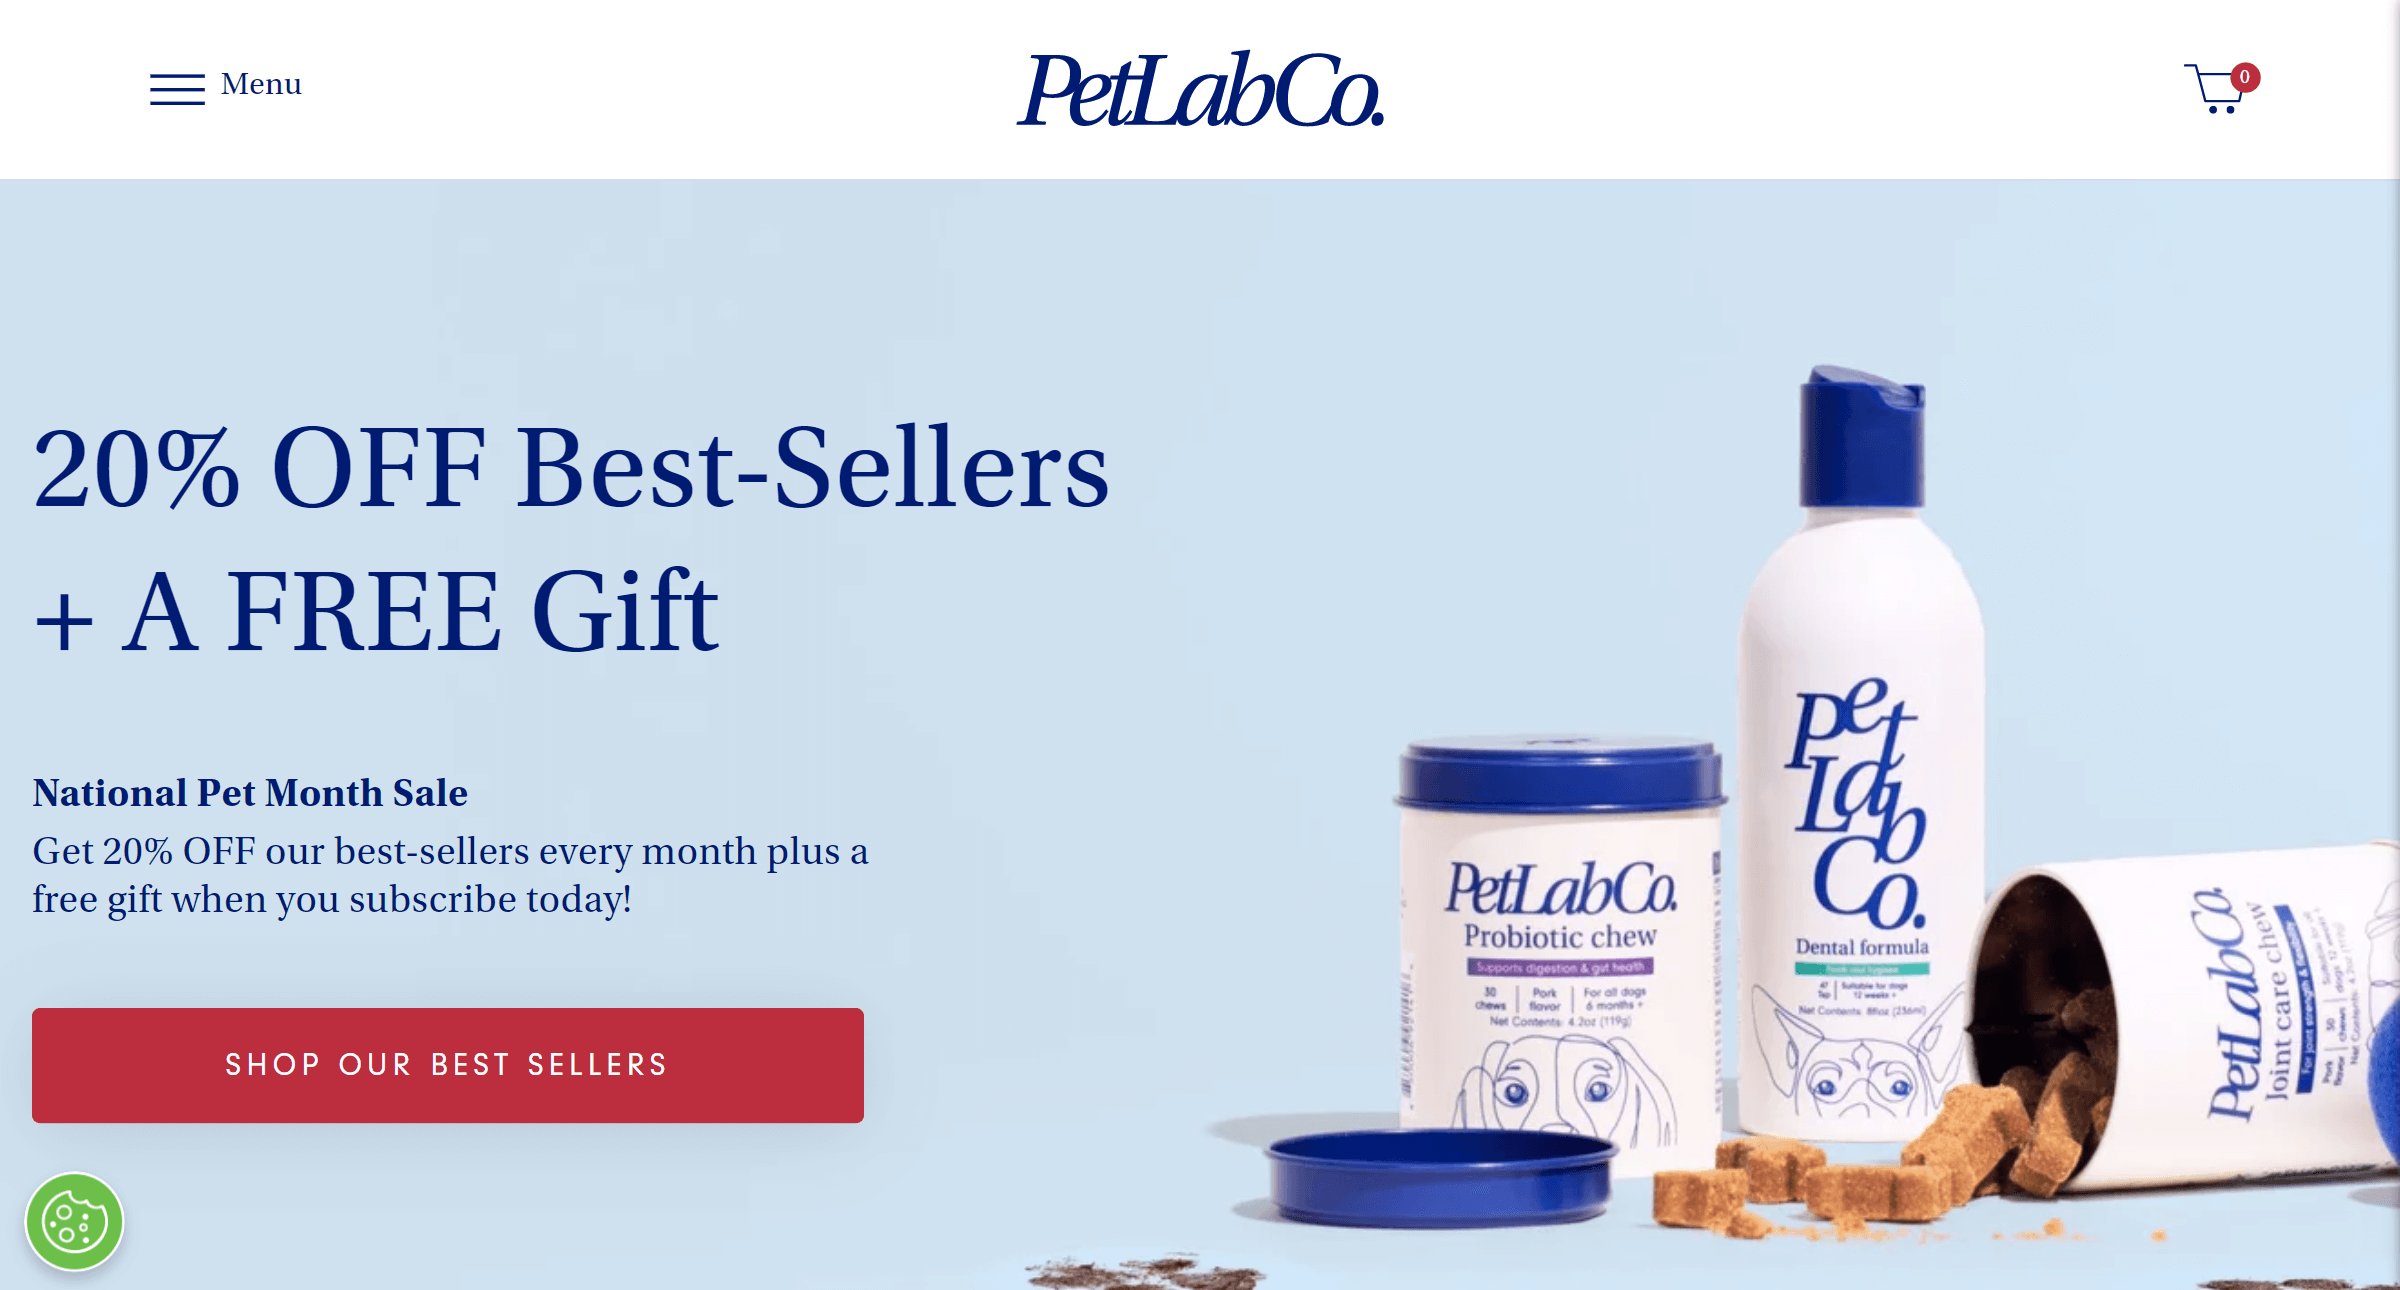 PetLab Co. on ReadSomeReviews